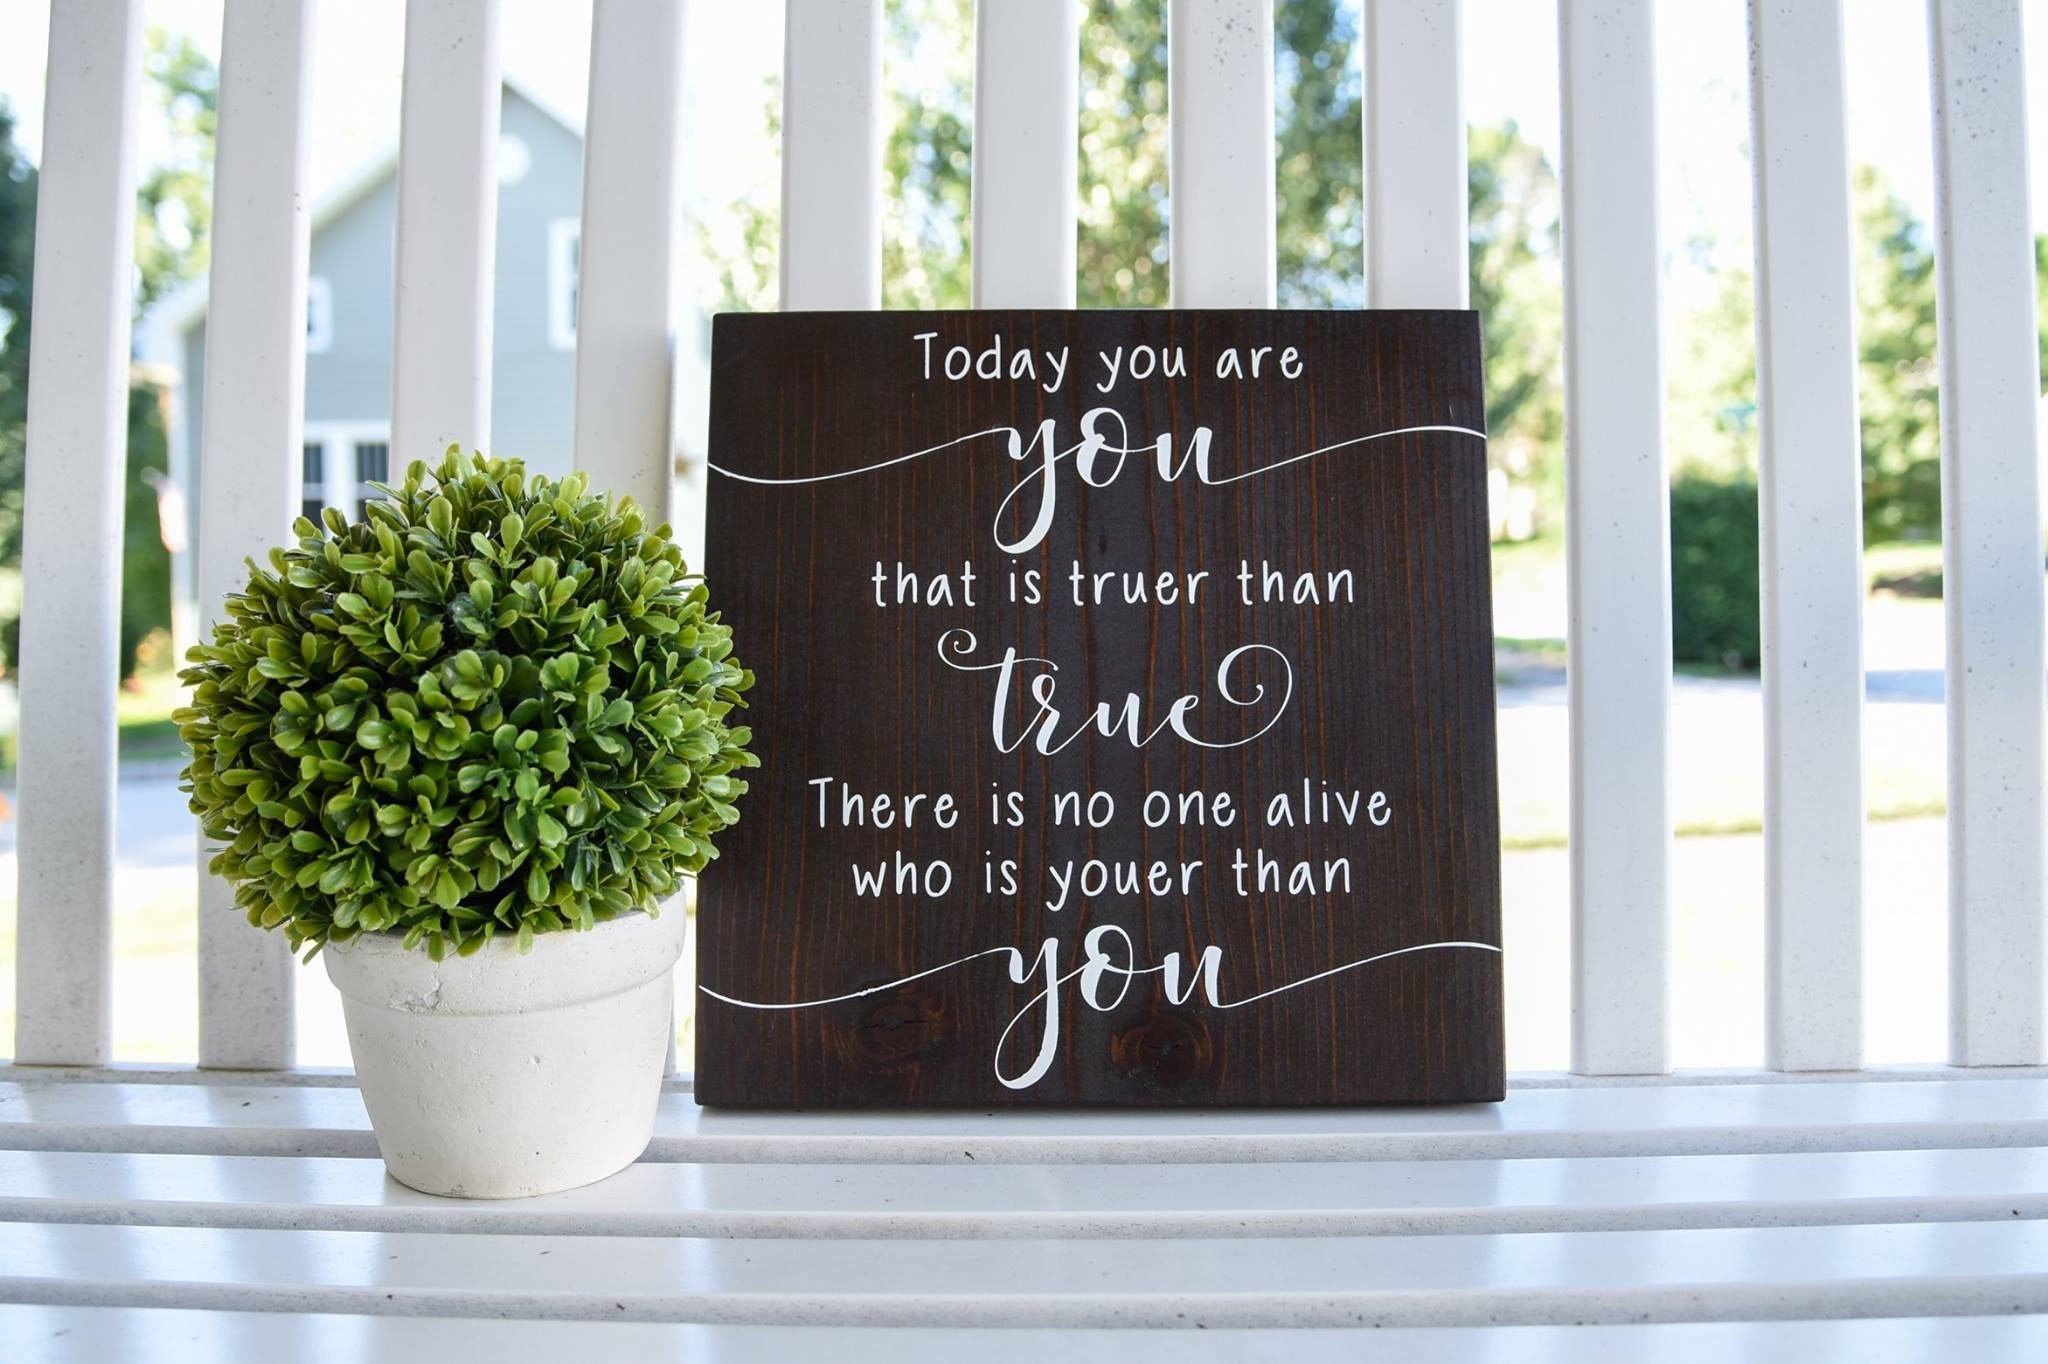 Today You Are You That is Truer Than True Wood Sign I Nursery | Etsy